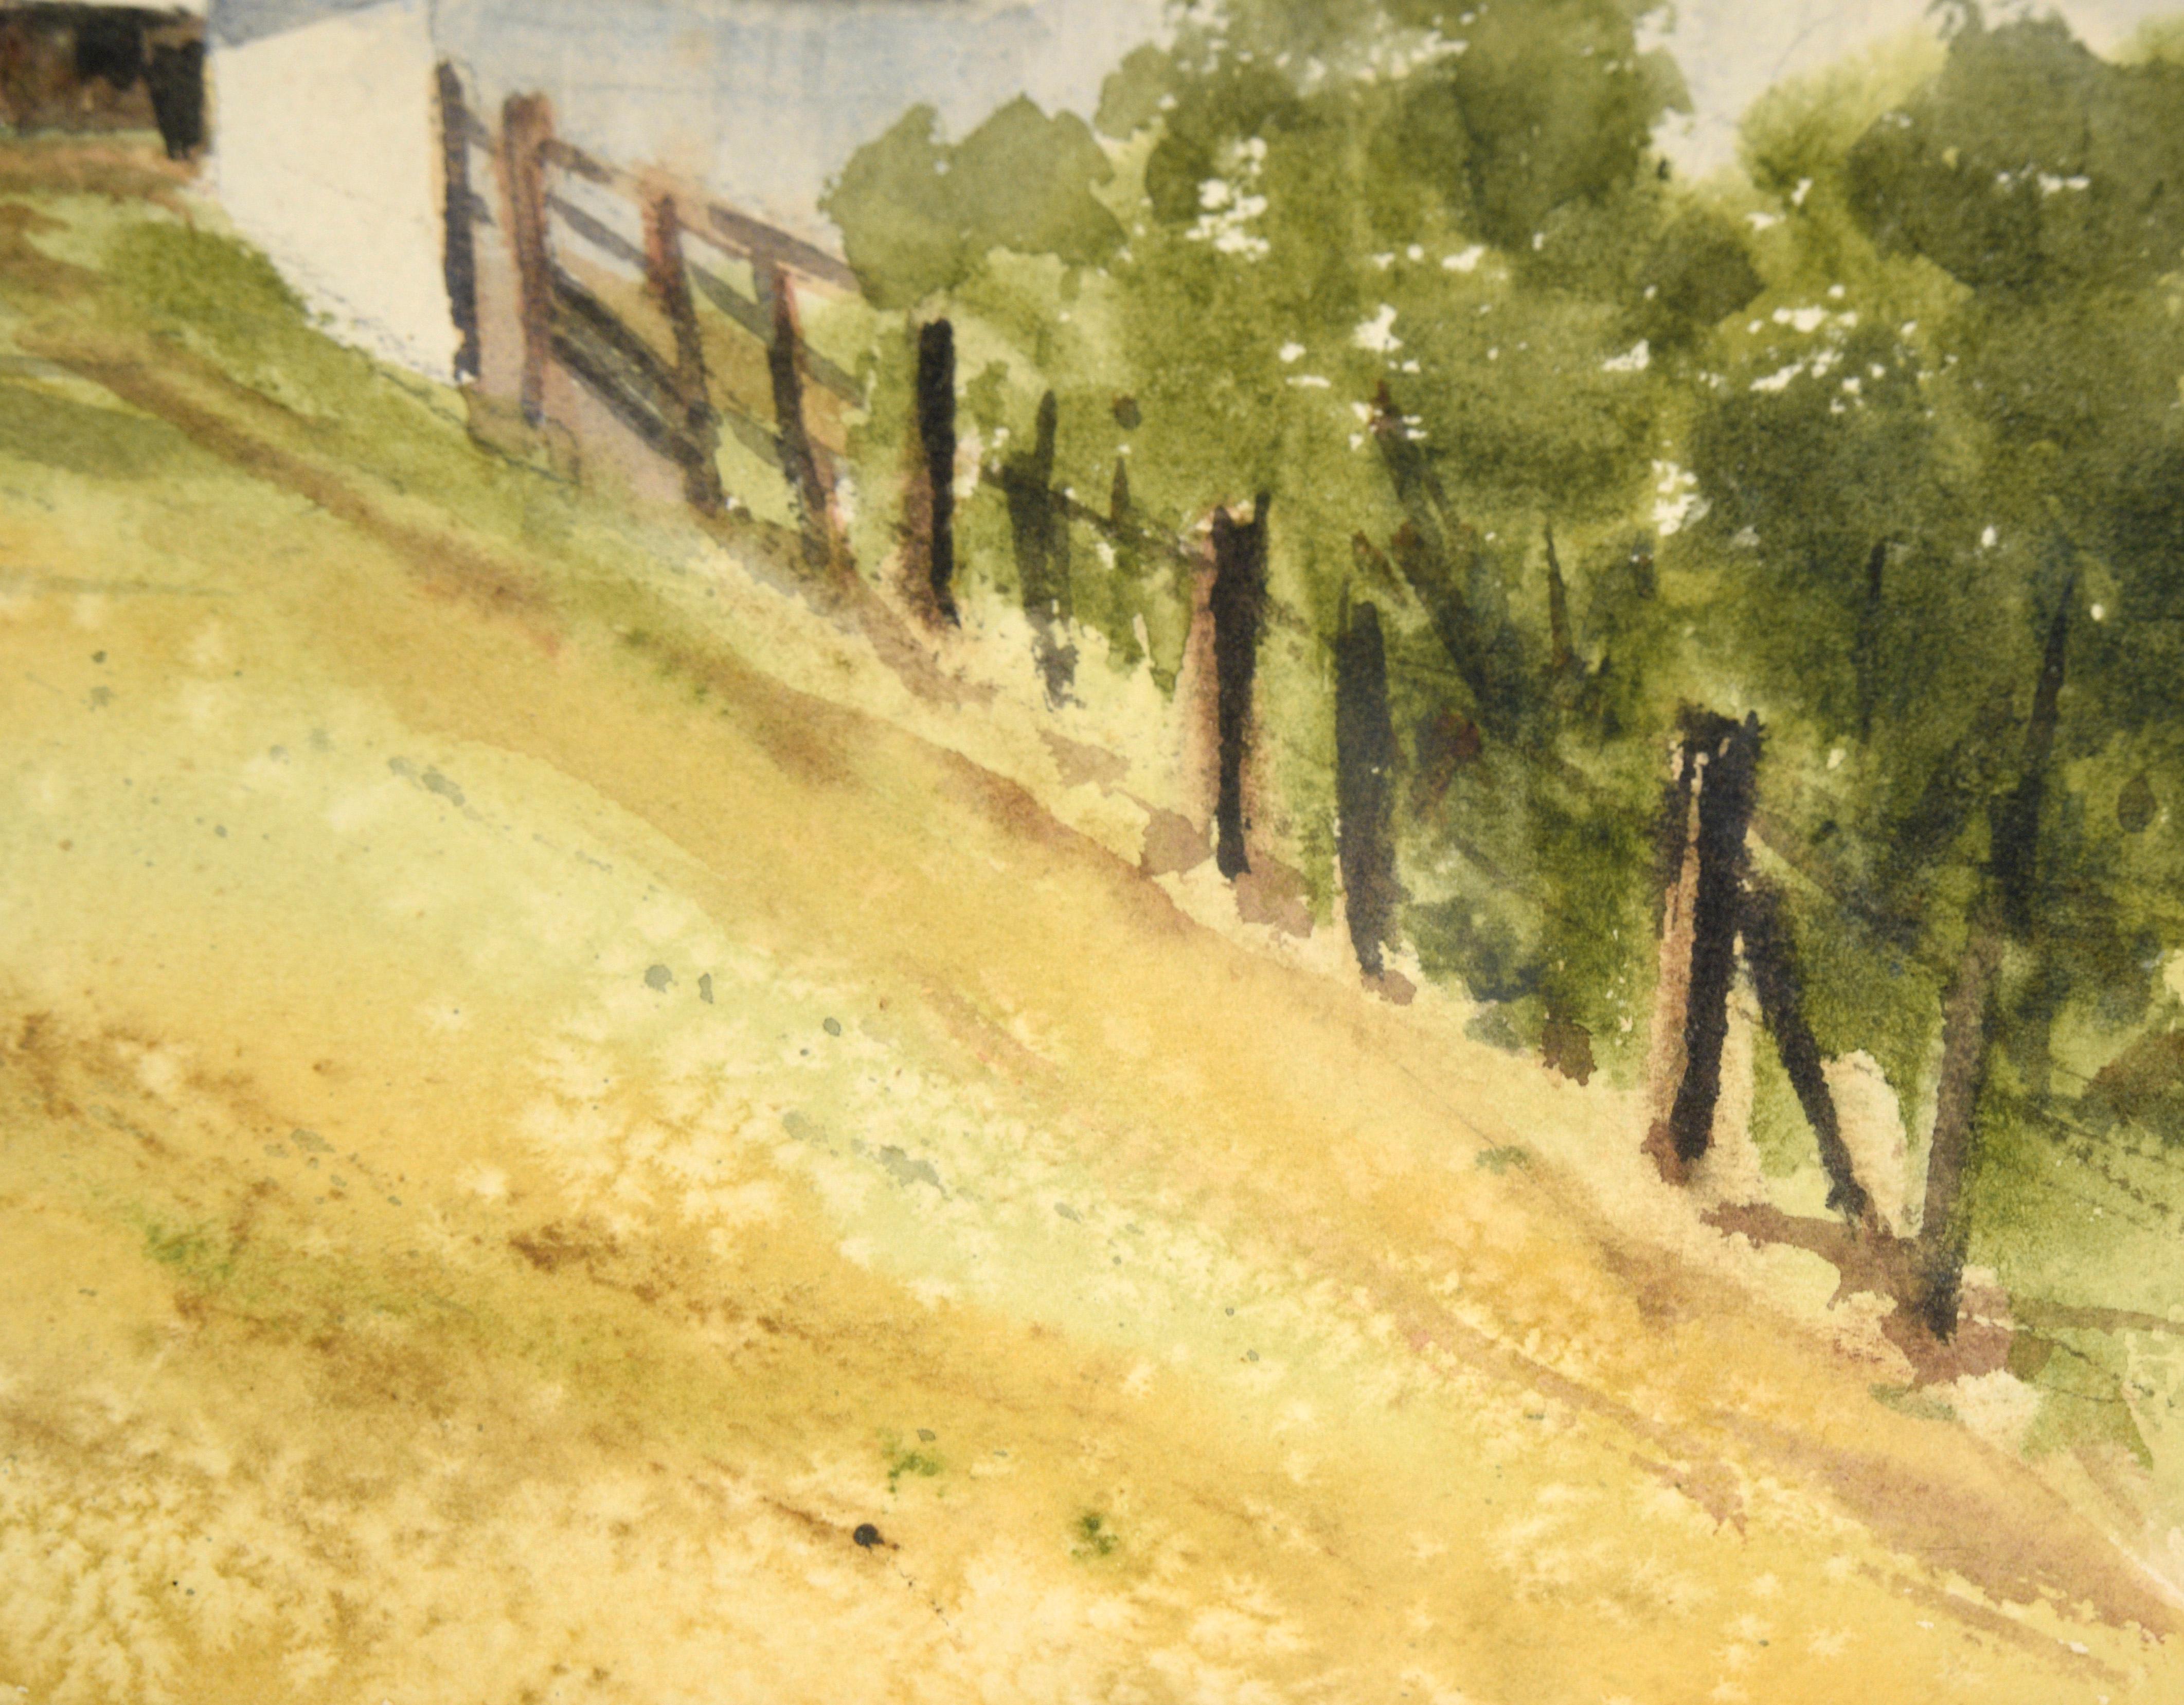 Grey Barn and Brown House - Rural California Landscape in Watercolor on Paper For Sale 3